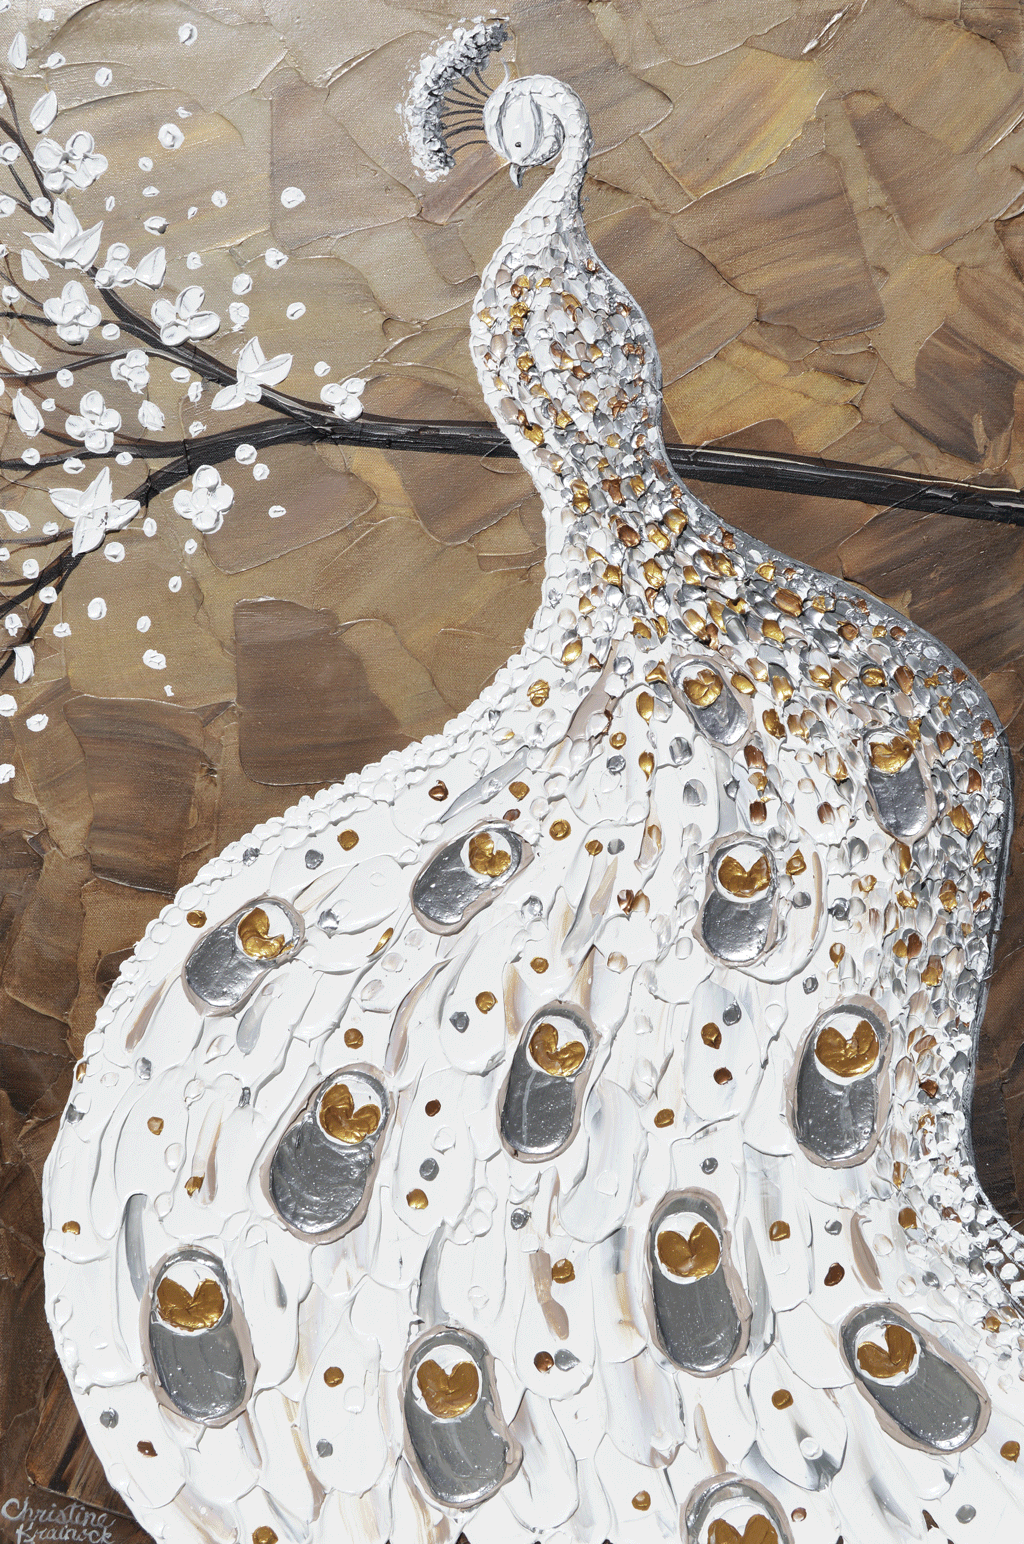 GICLEE PRINT Art White Peacock Painting Abstract Large Canvas Prints Blossoms Brown Silver Gold - Christine Krainock Art - Contemporary Art by Christine - 4